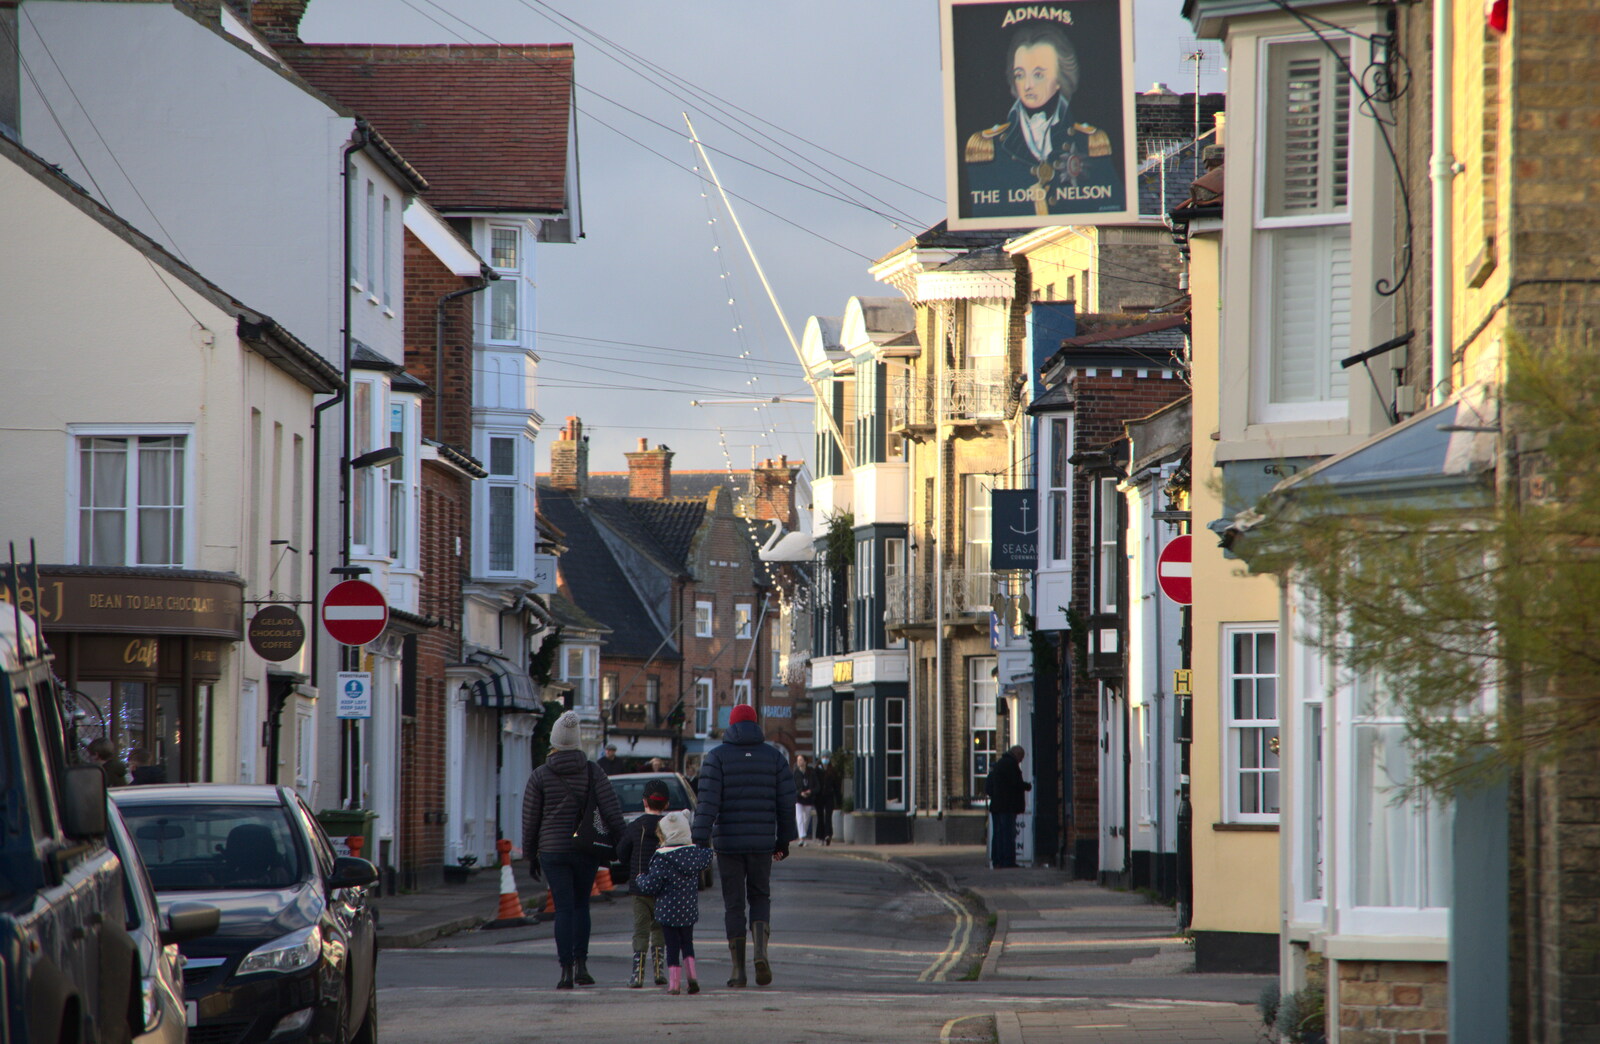 Looking up East Street from A Return to the Beach, Southwold, Suffolk - 20th December 2020